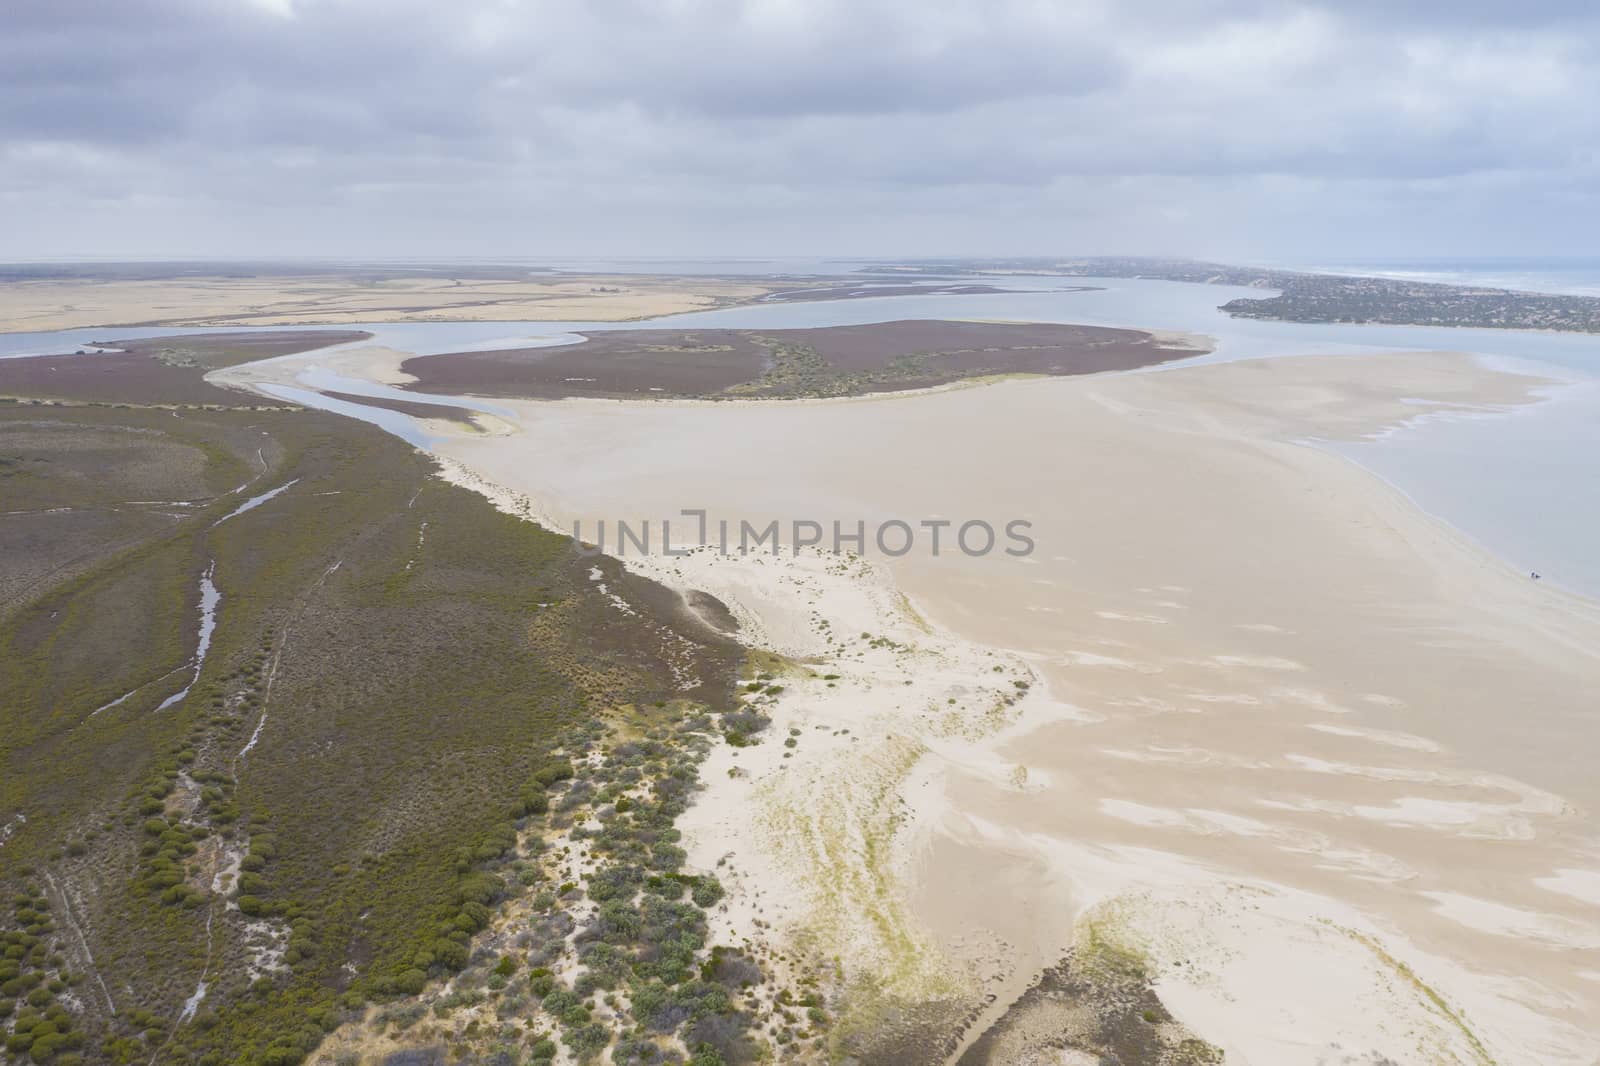 Aerial view of the mouth of the River Murray in regional South Australia in Australia